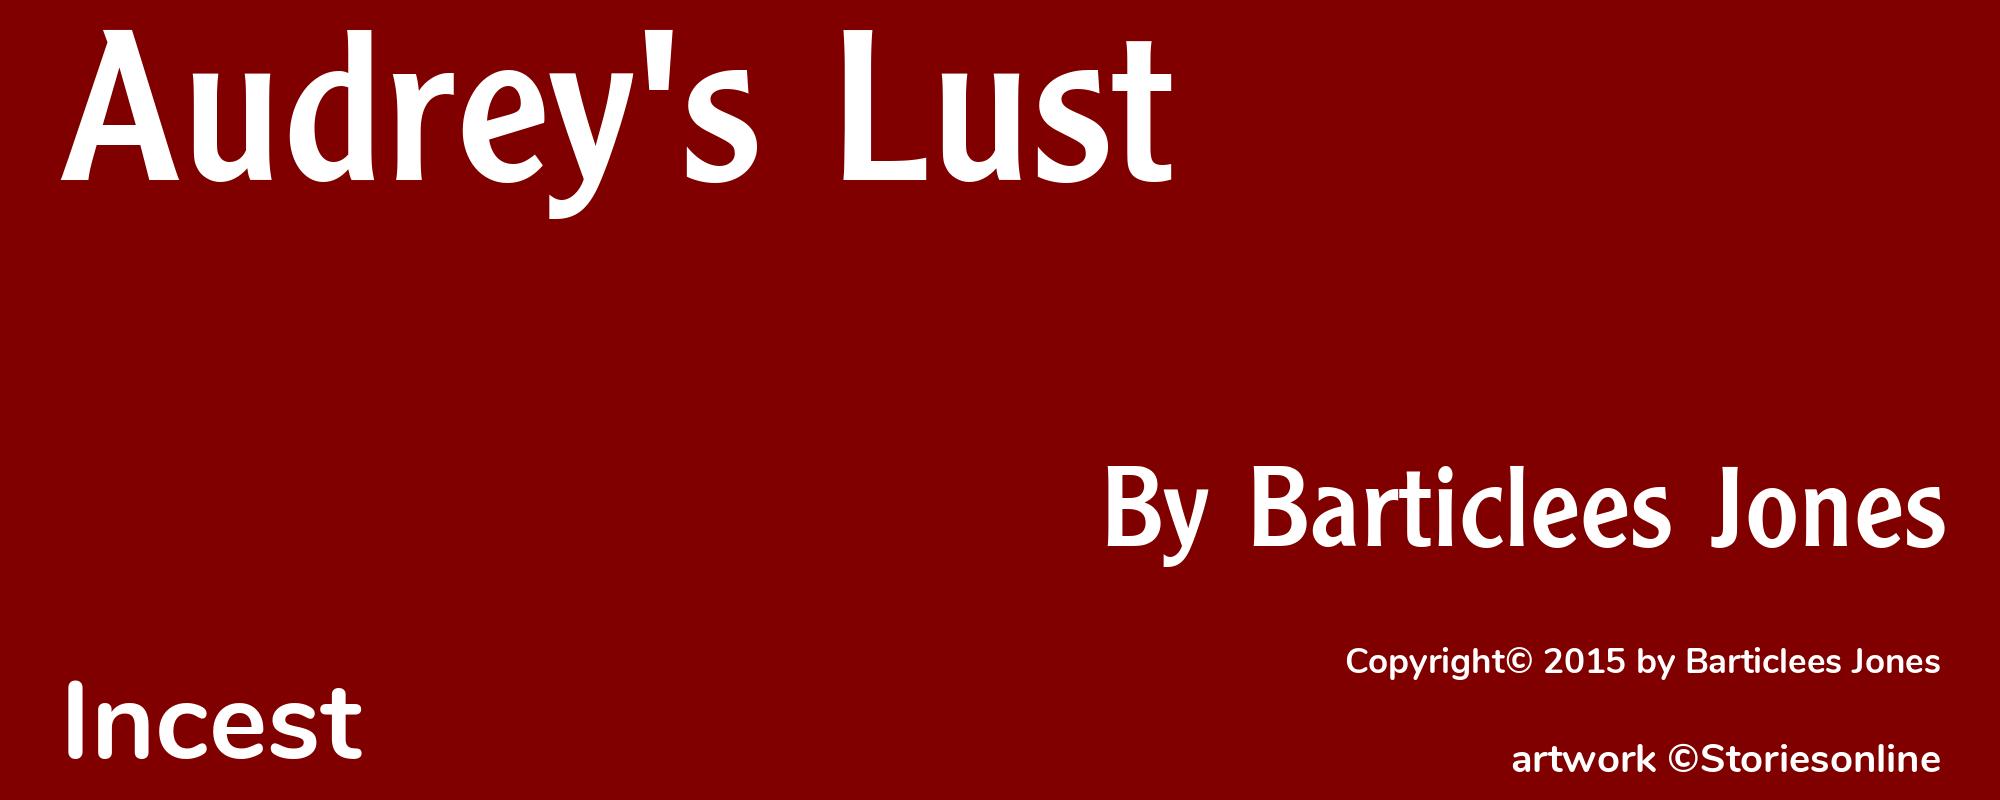 Audrey's Lust - Cover